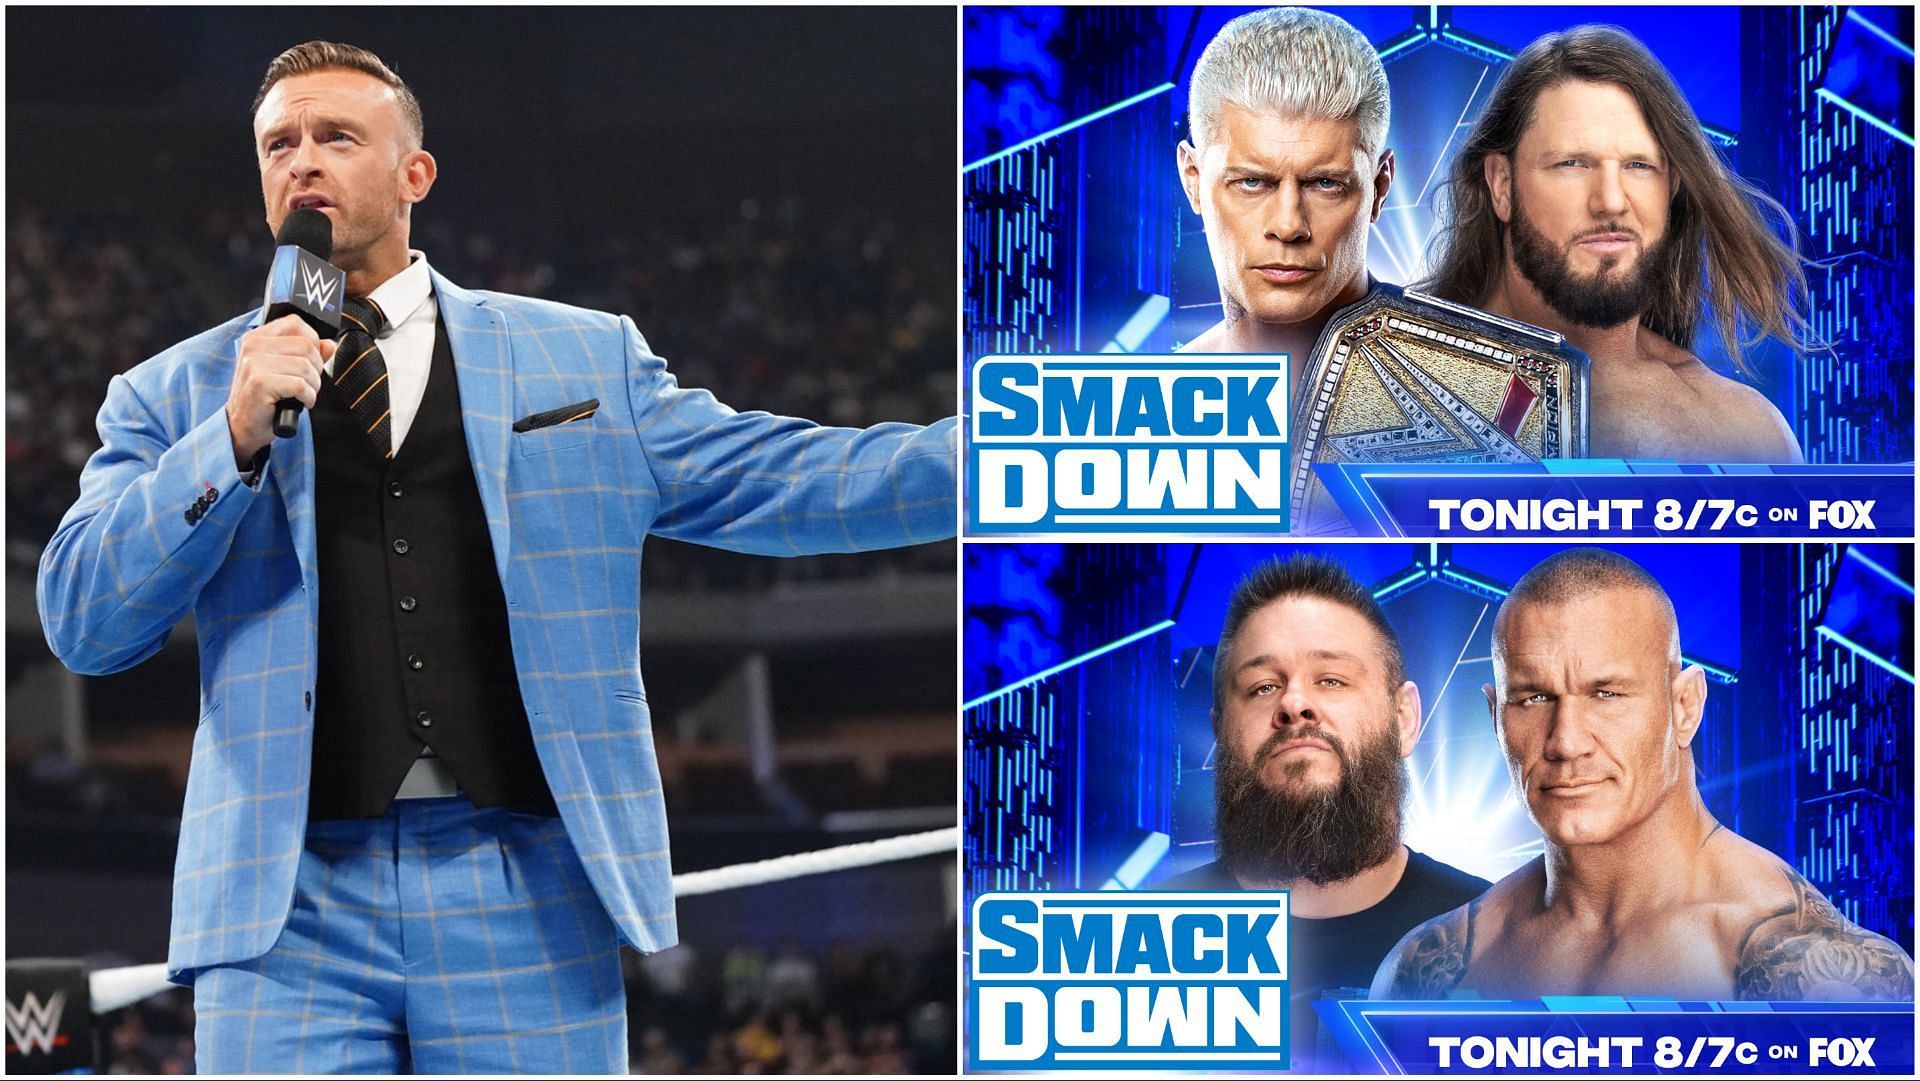 Nick Aldis on WWE SmackDown, promotional graphics for tonight